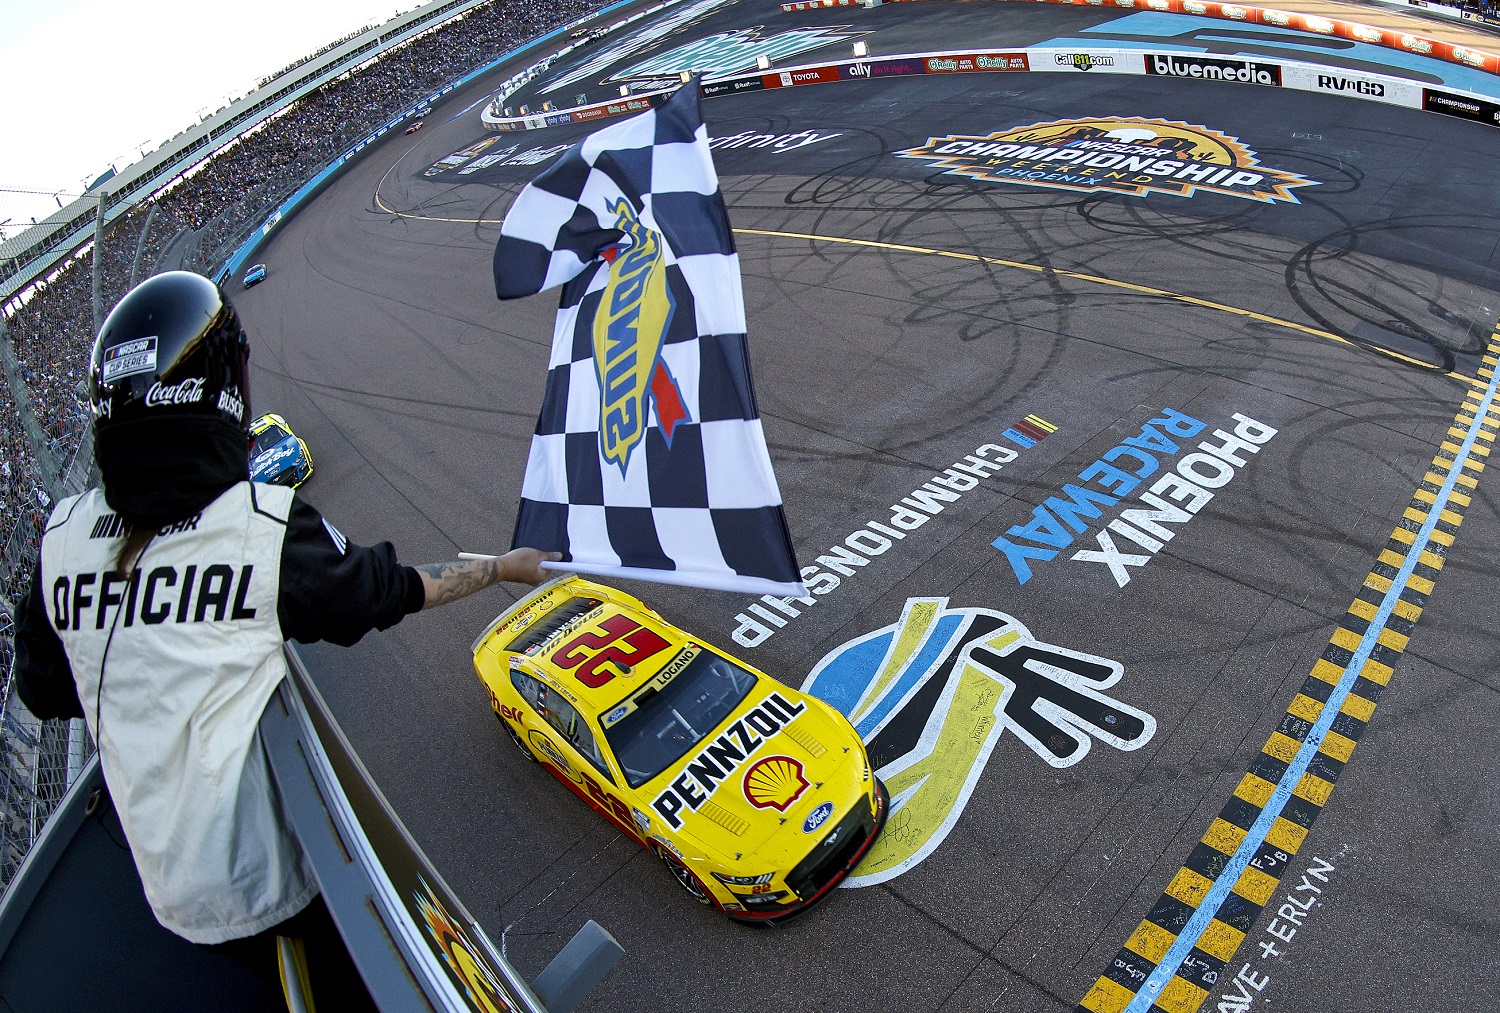 Joey Logano takes the checkered flag to win the 2022 NASCAR Cup Series Championship at Phoenix Raceway on Nov. 6, 2022.